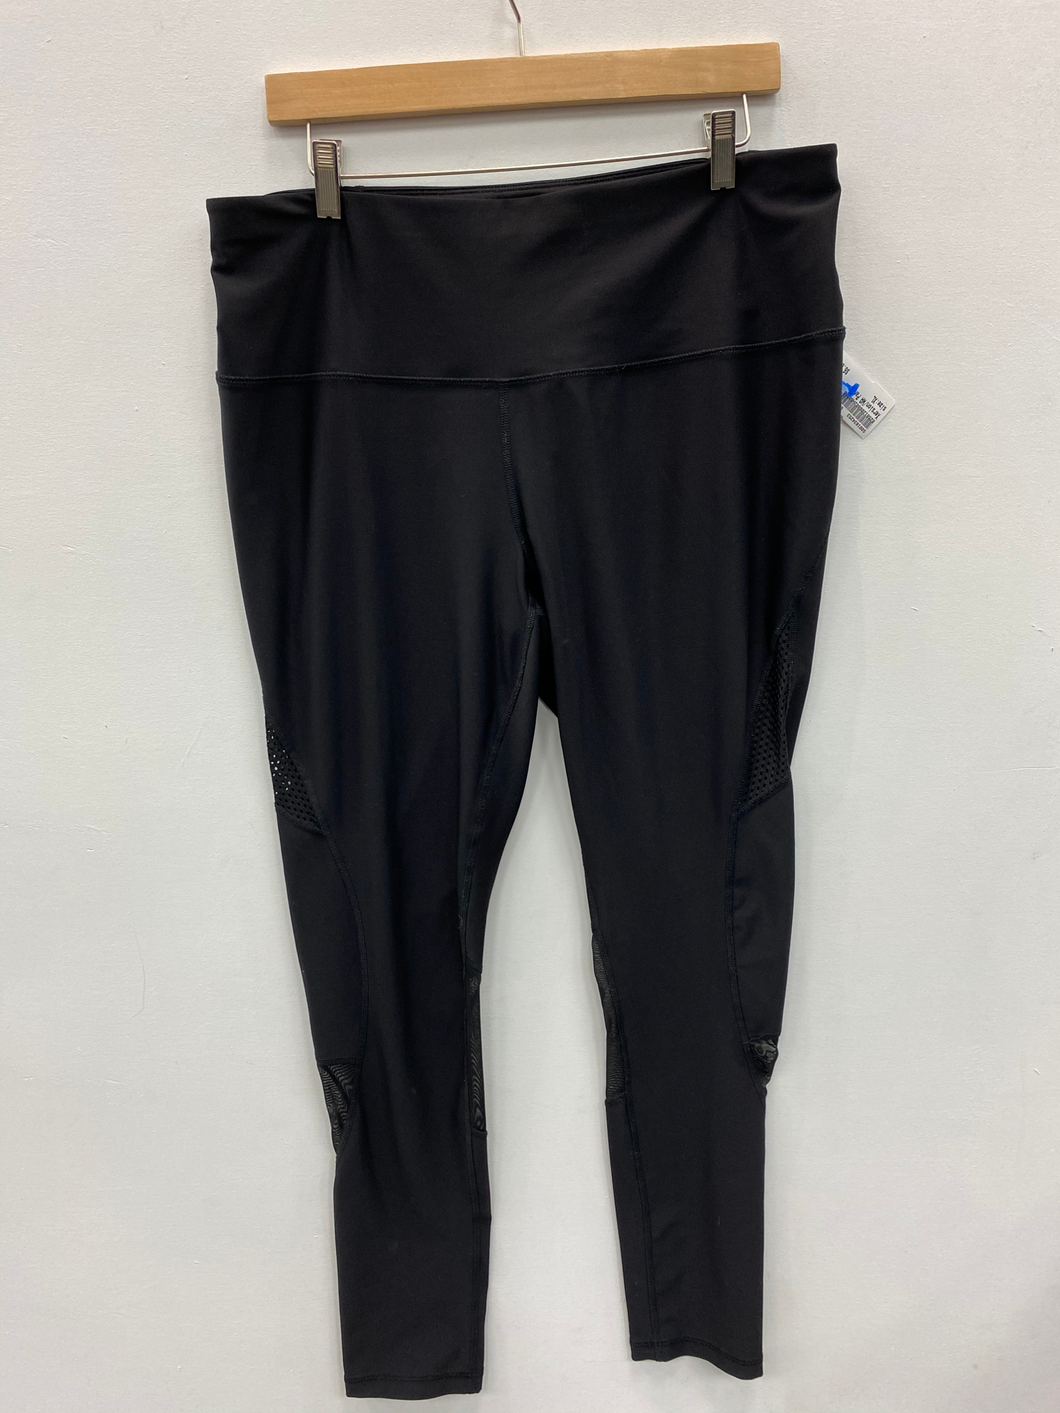 Xersion Athletic Pants Size Extra Large